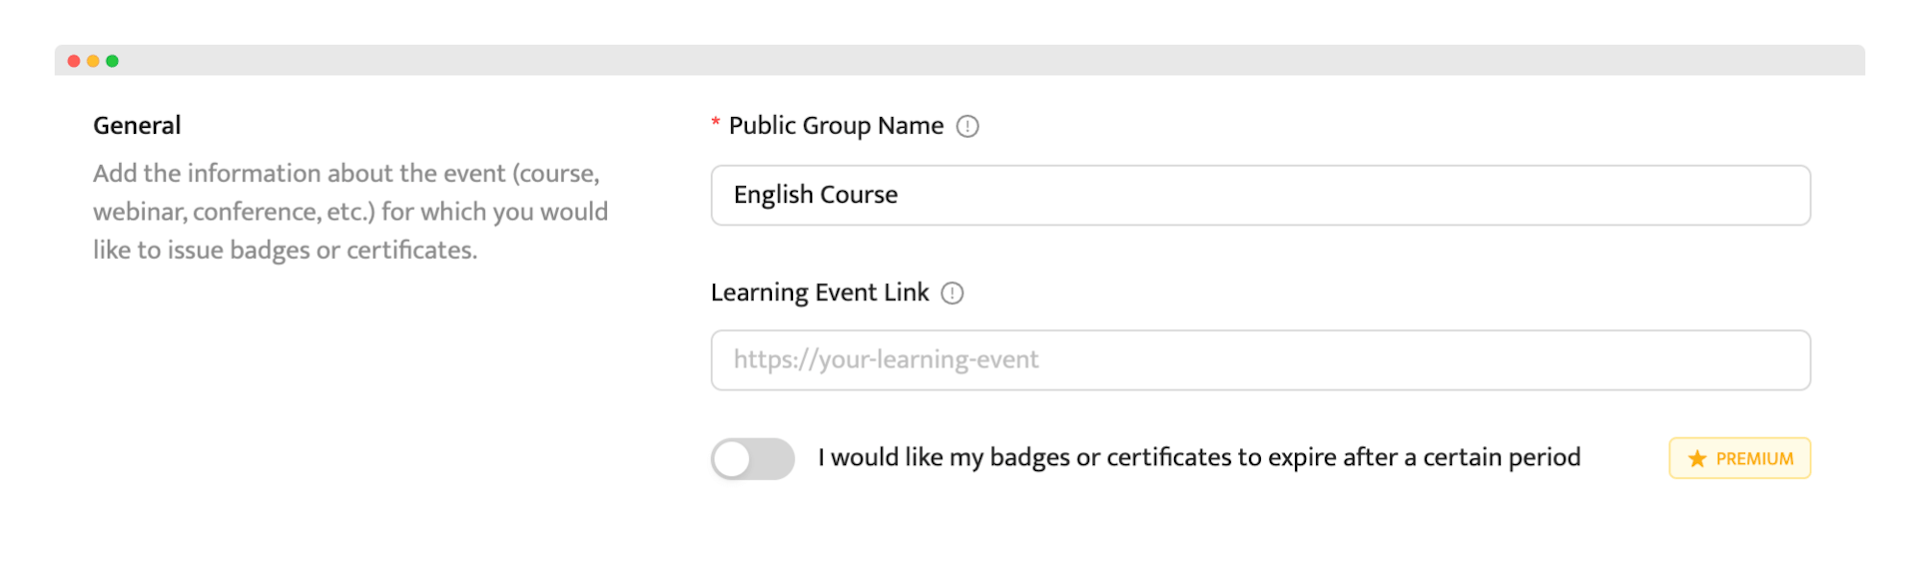 Creating group of recipients in Certifier to send event certificates in bulk.